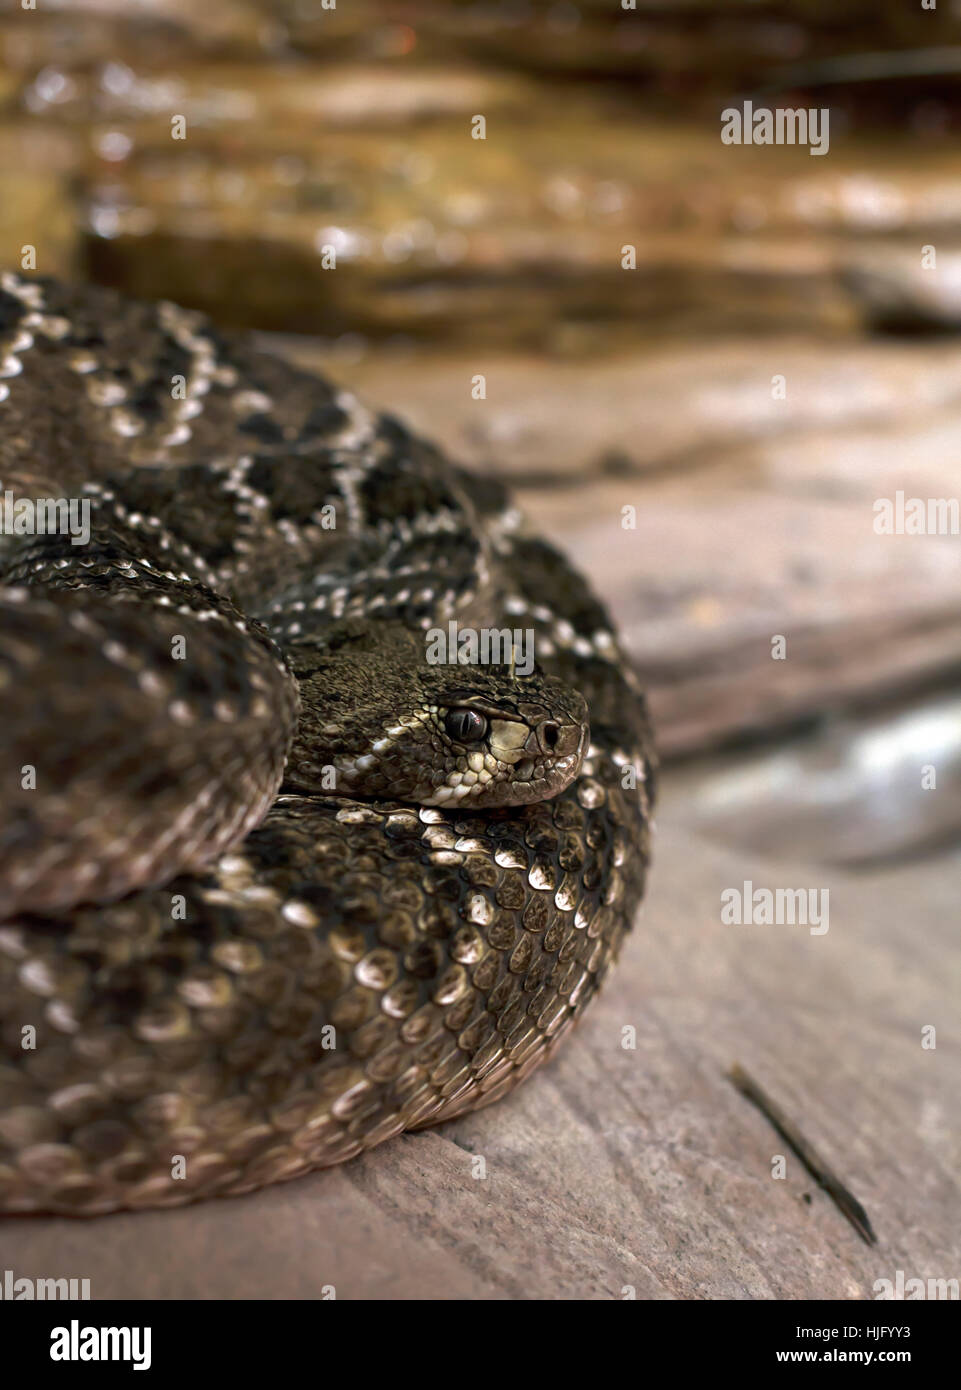 Close up of an Eastern diamondback rattlesnake in a coil Stock Photo